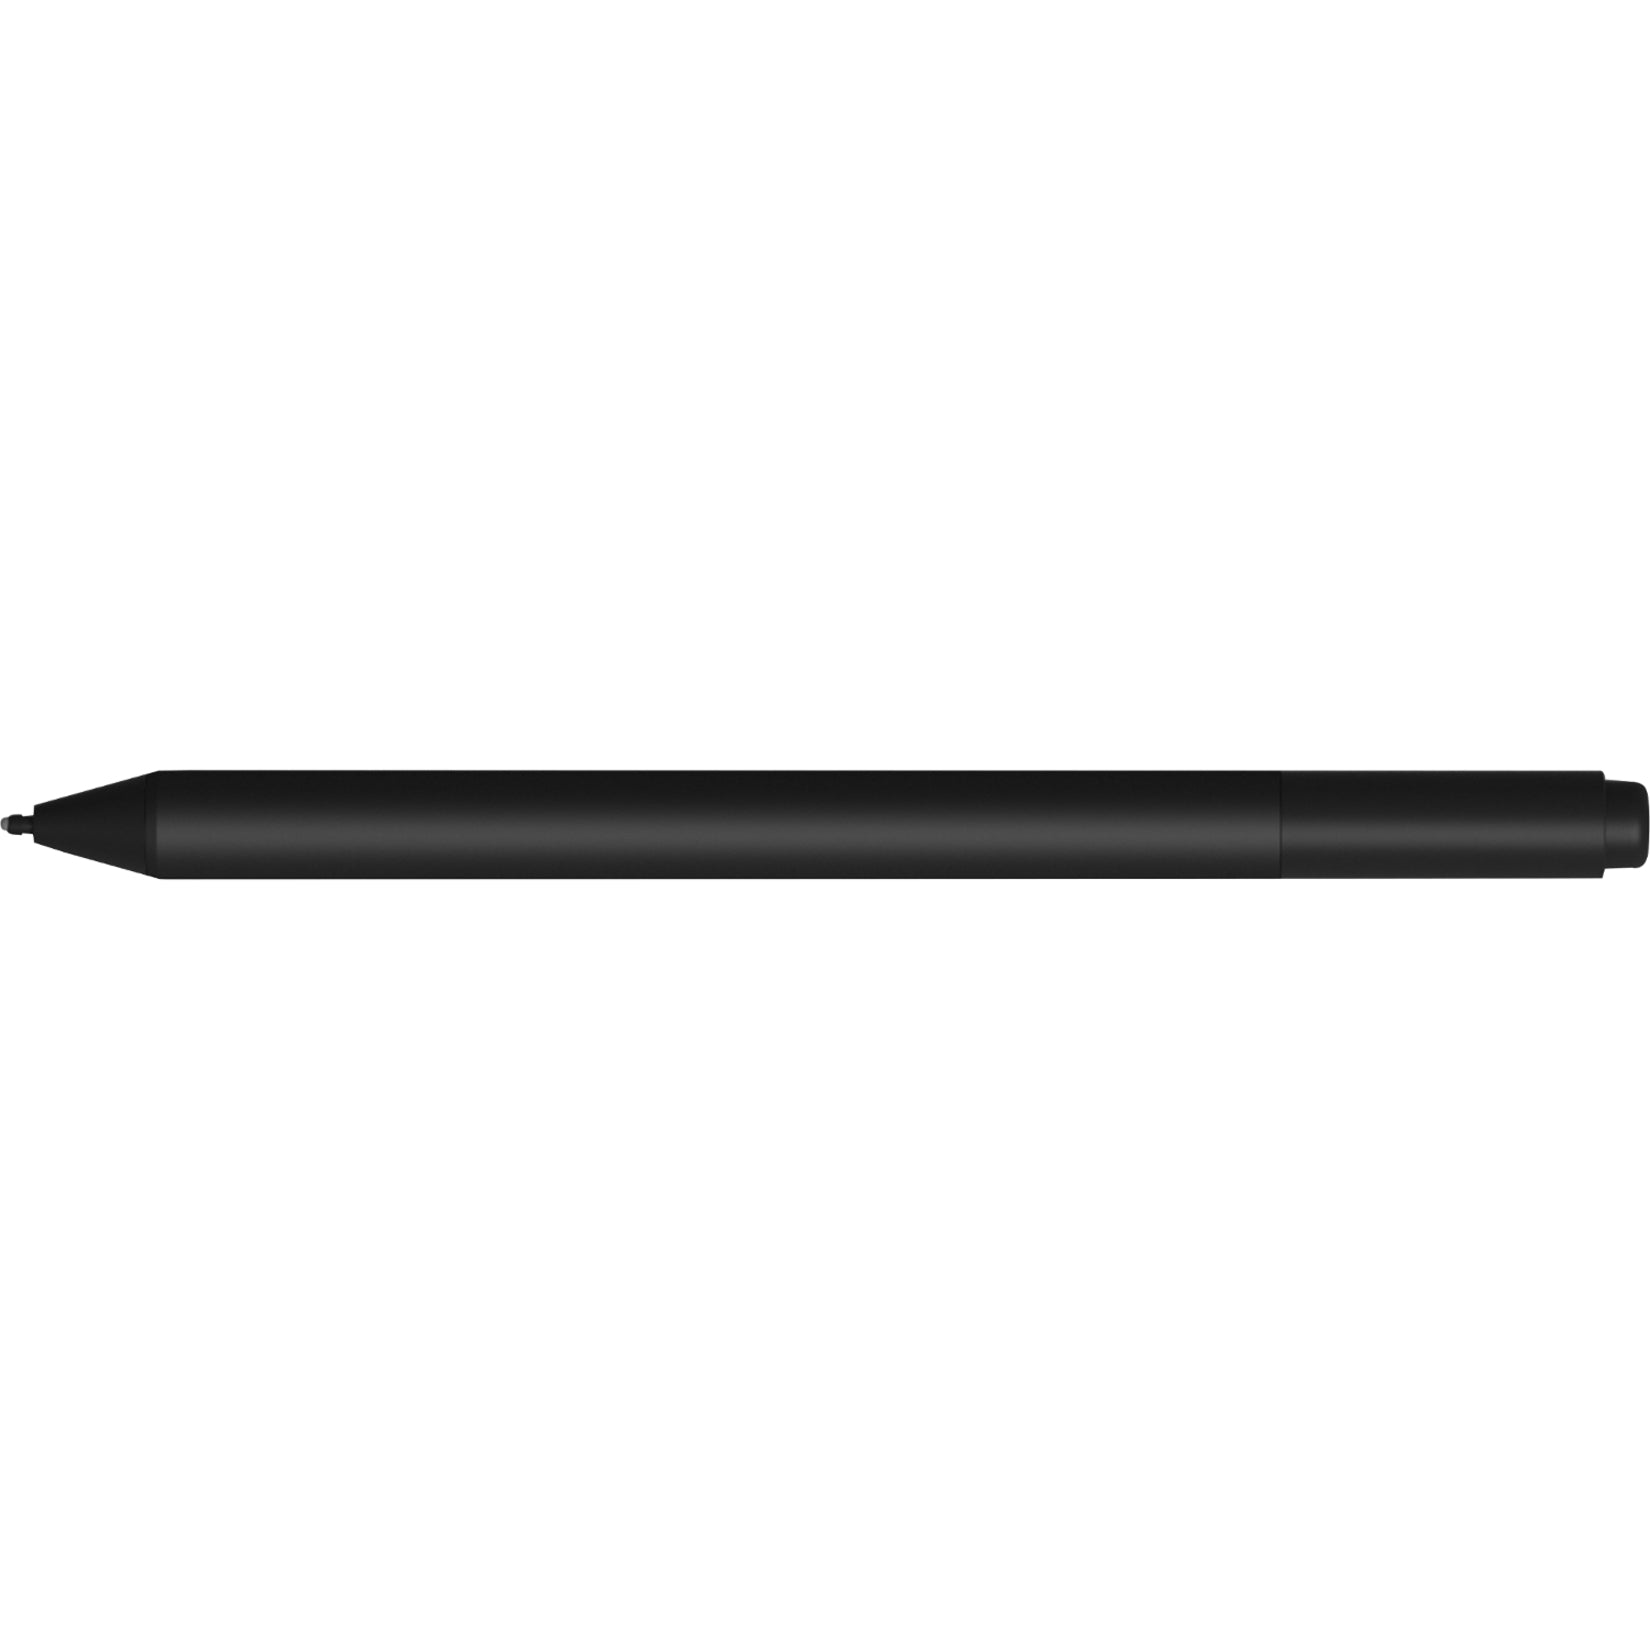 Microsoft EYV-00001 Surface Pen Stylus, Bluetooth Enabled for Notebook and Tablet